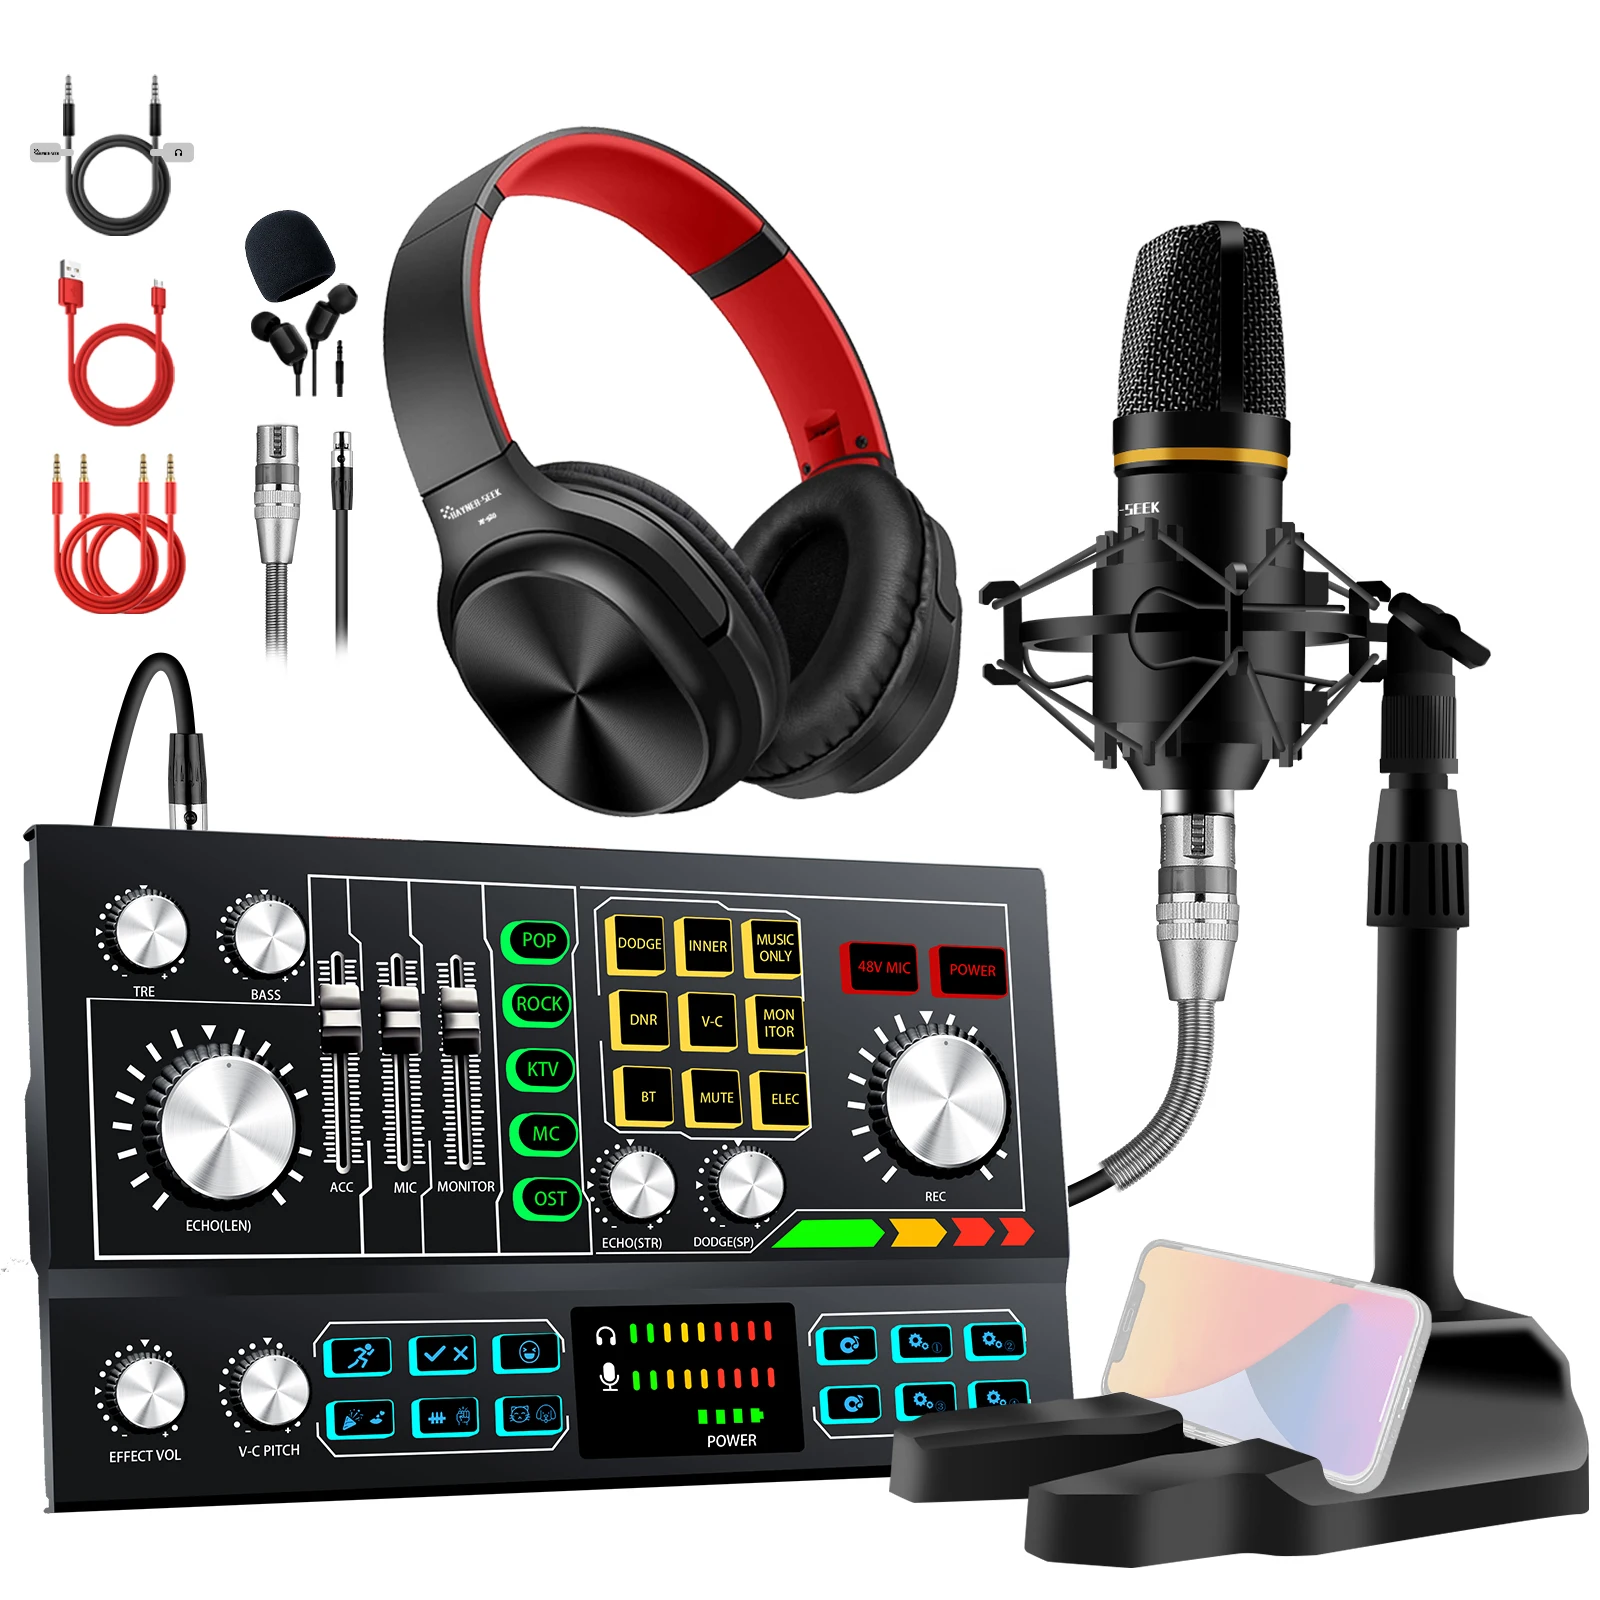 

Recording Studio Sound Card Mixer Full Set Live Streaming Kit With 48V Condenser Microphone